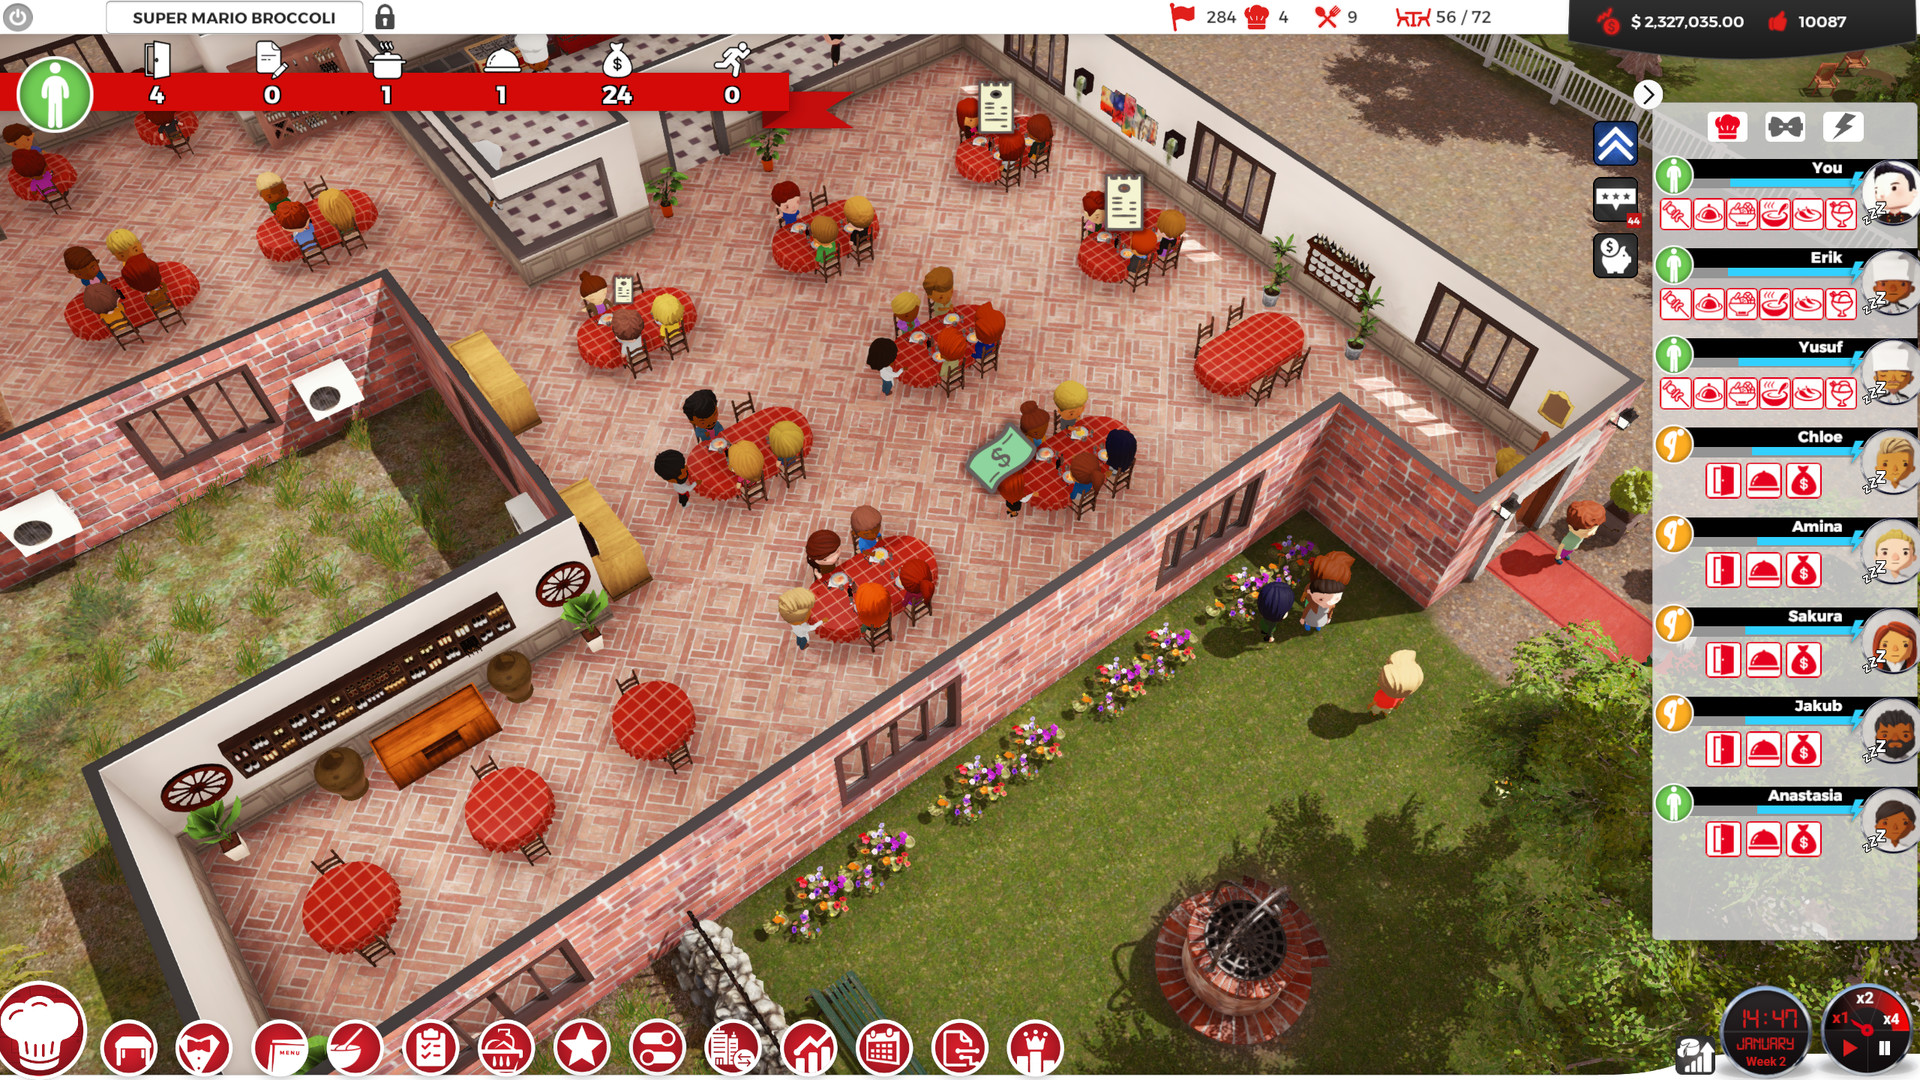 Chef A Restaurant Tycoon Game On Steam - roblox restaurant tycoon getting started guide